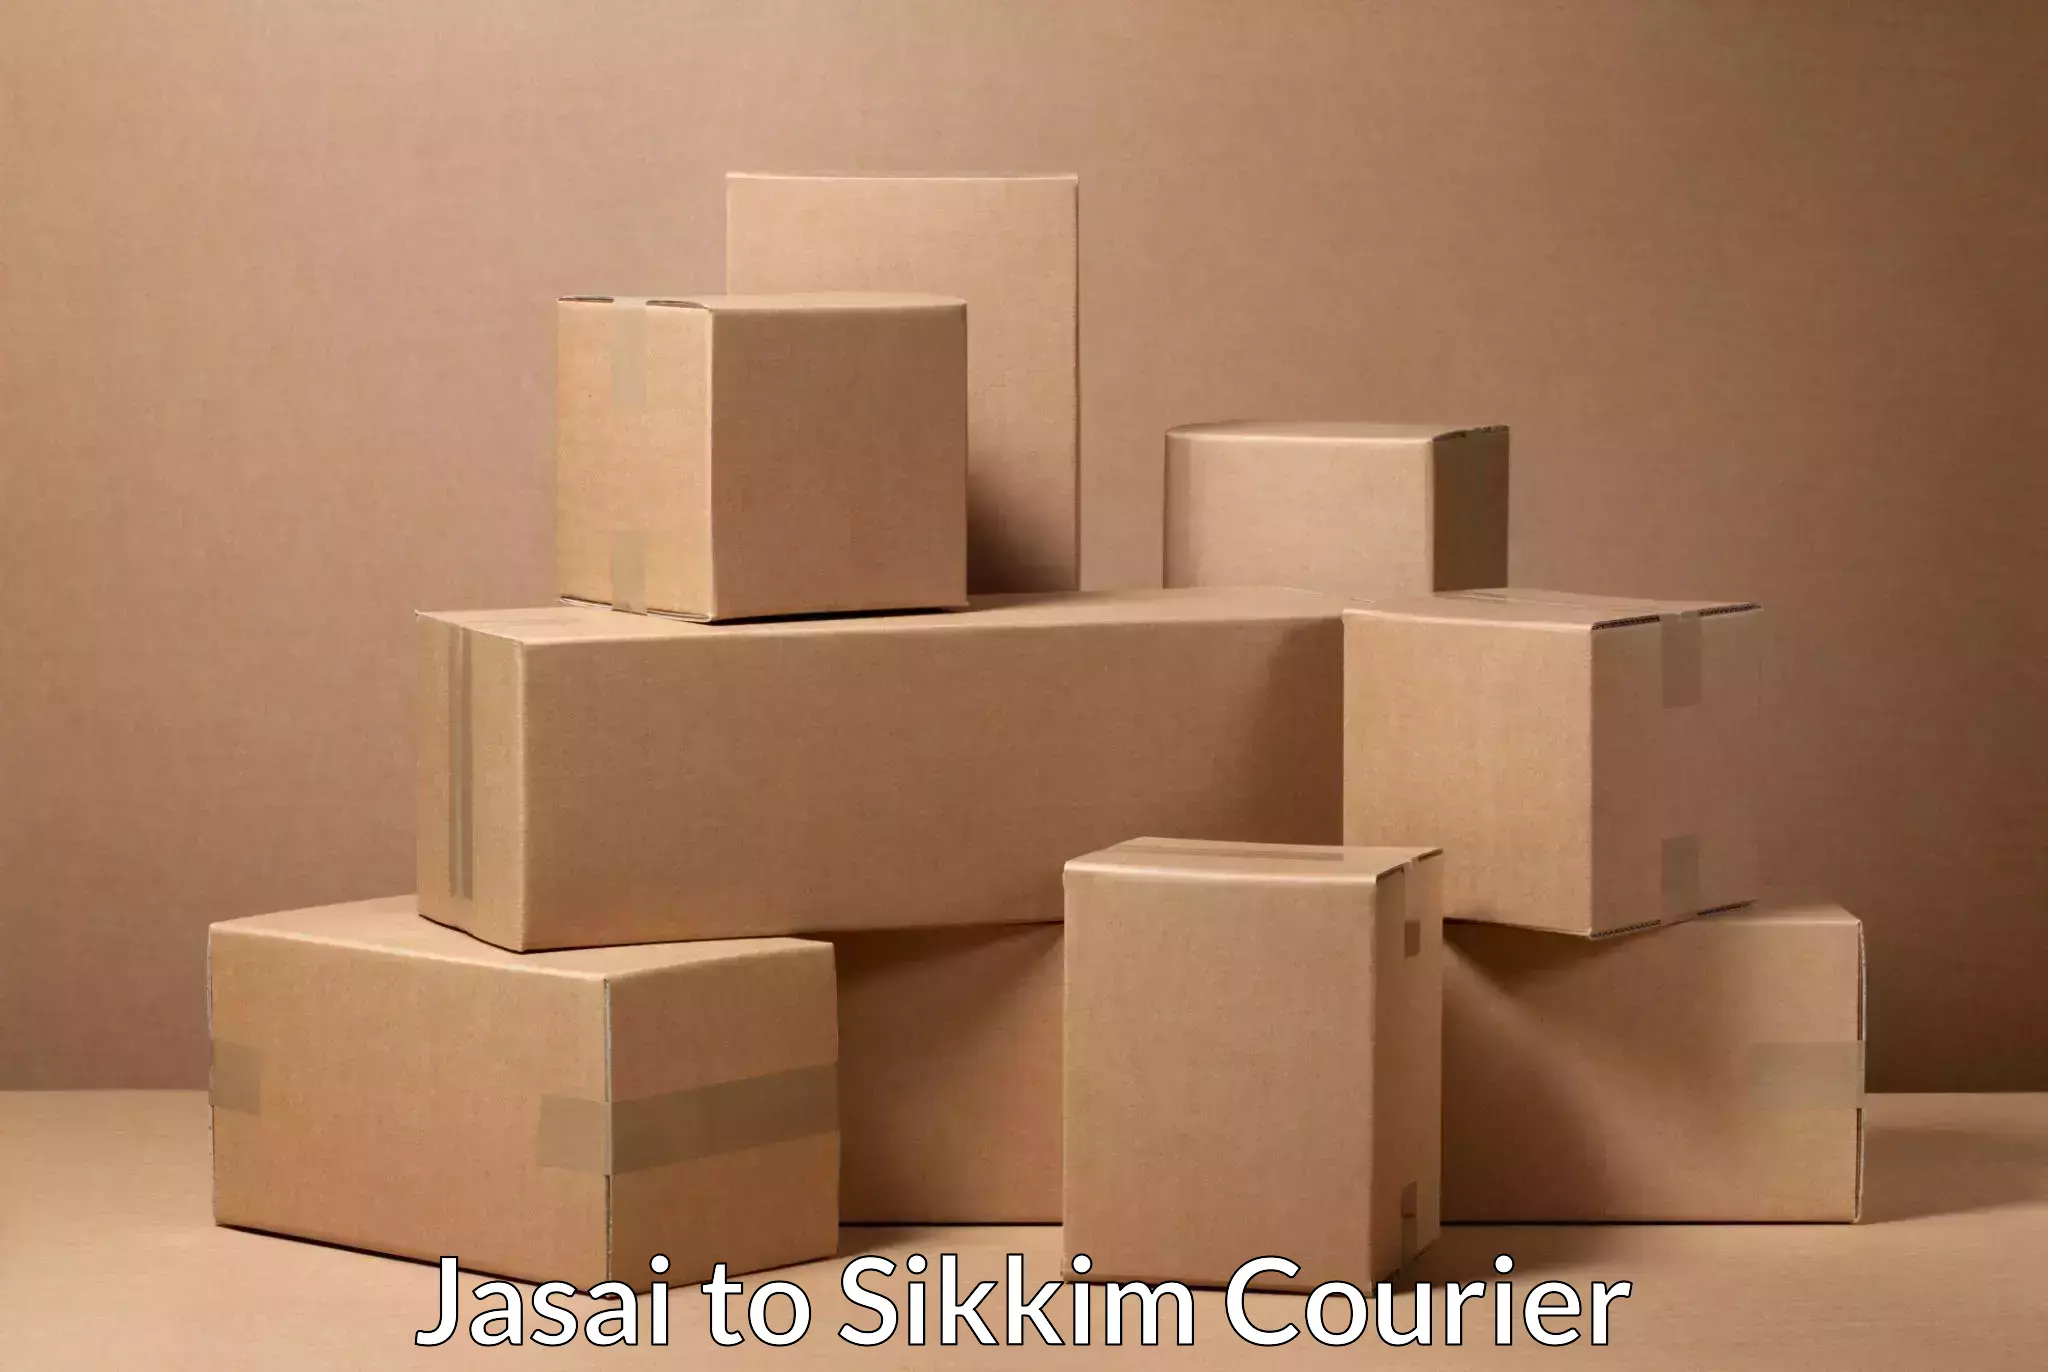 Cost-effective courier options Jasai to Pelling